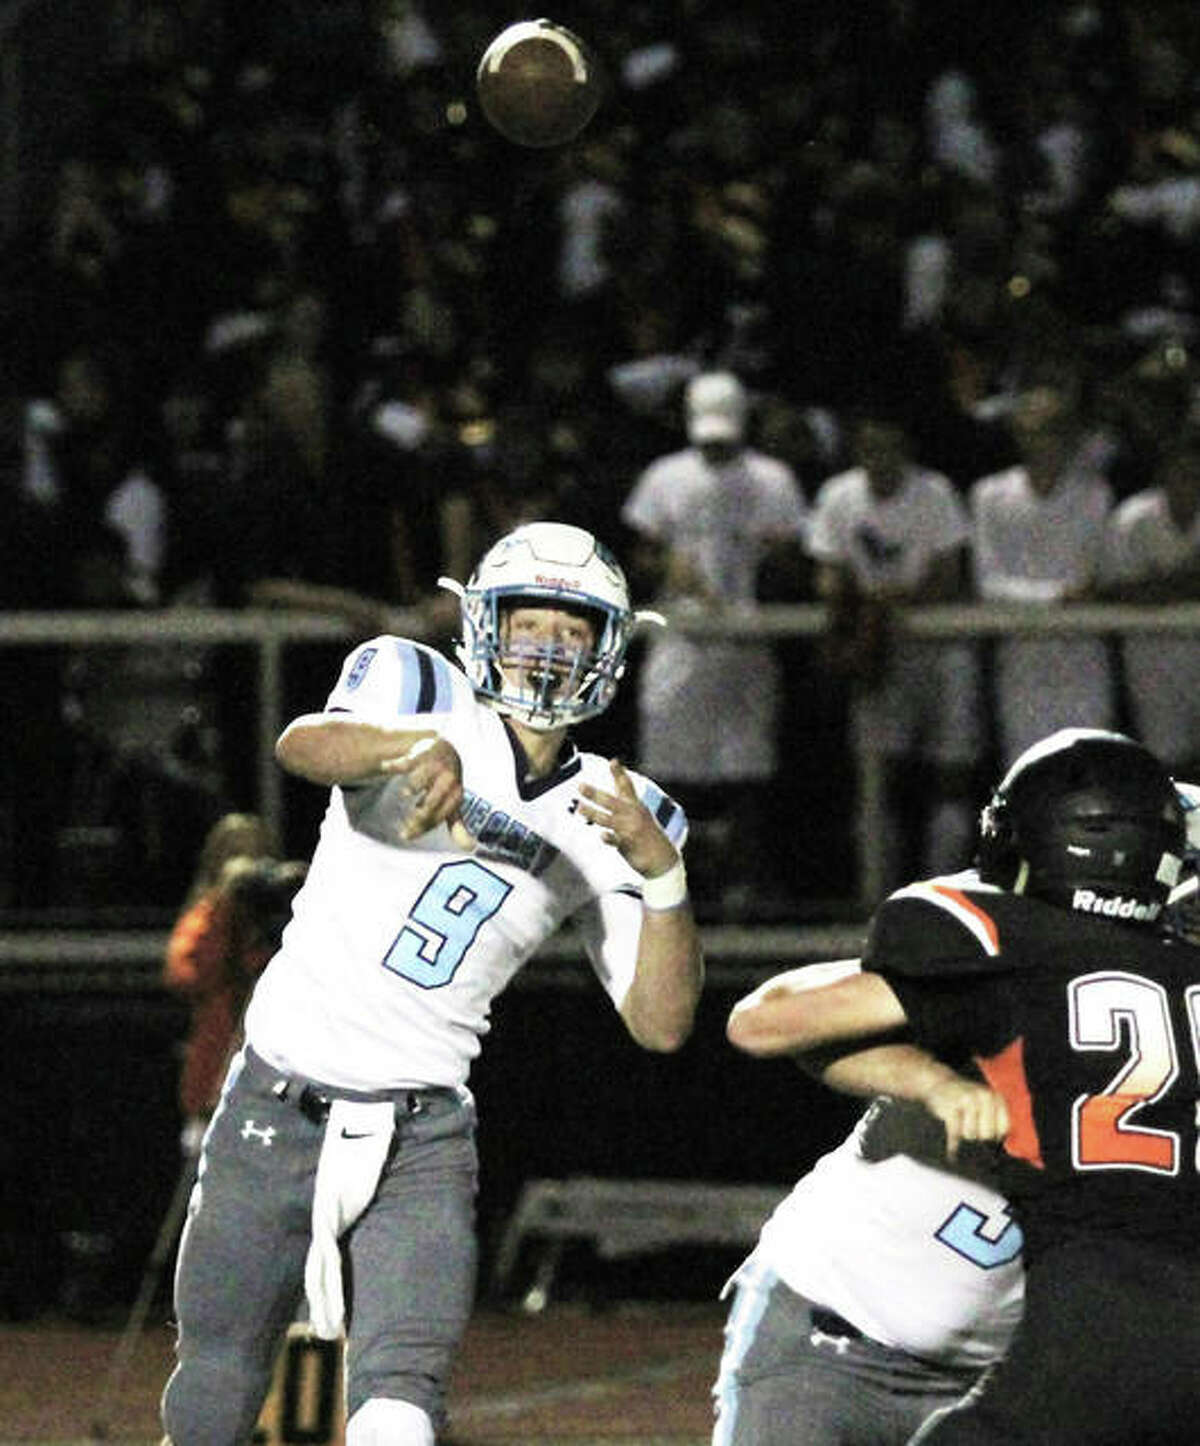 Jersey quarterback Matthew Jackson (left), shown throwing a pass in a game last season at Waterloo, ran for 170 yards and two touchdowns Saturday night in the Warriors’ season-opening victory at Granite City.